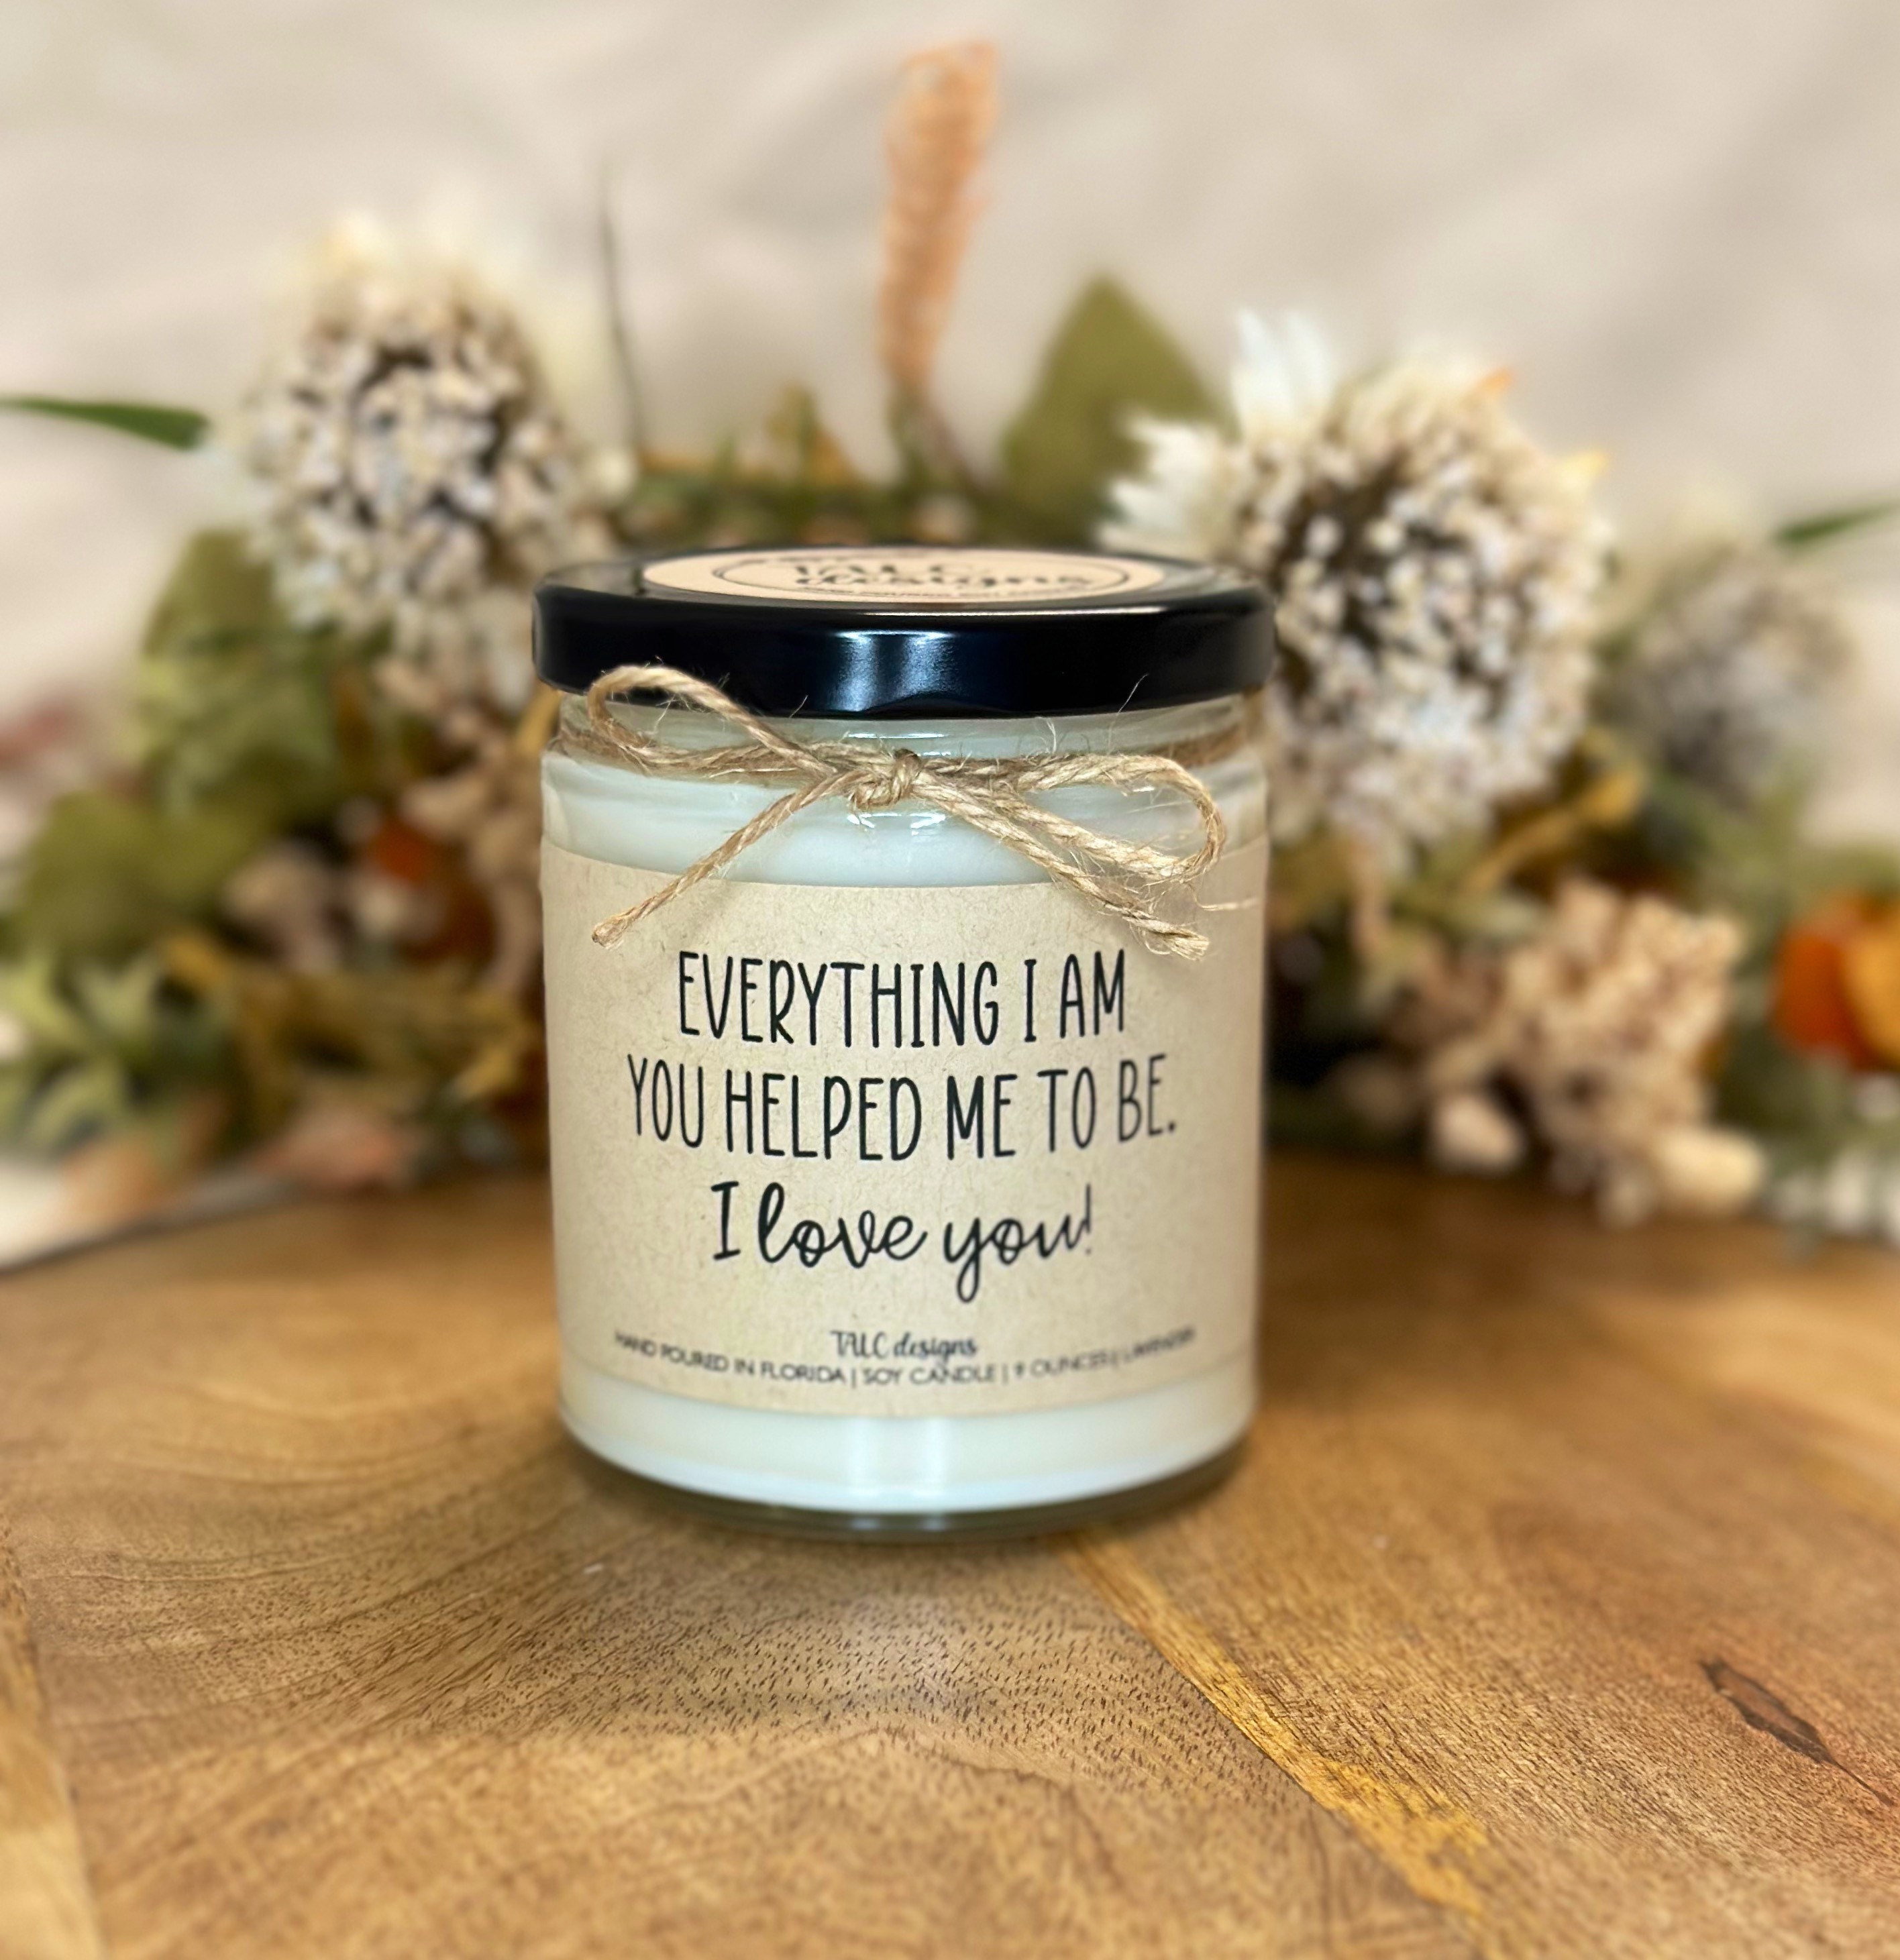 valentine candle, i heart love you soy blend wax candle novelty gift jar tin